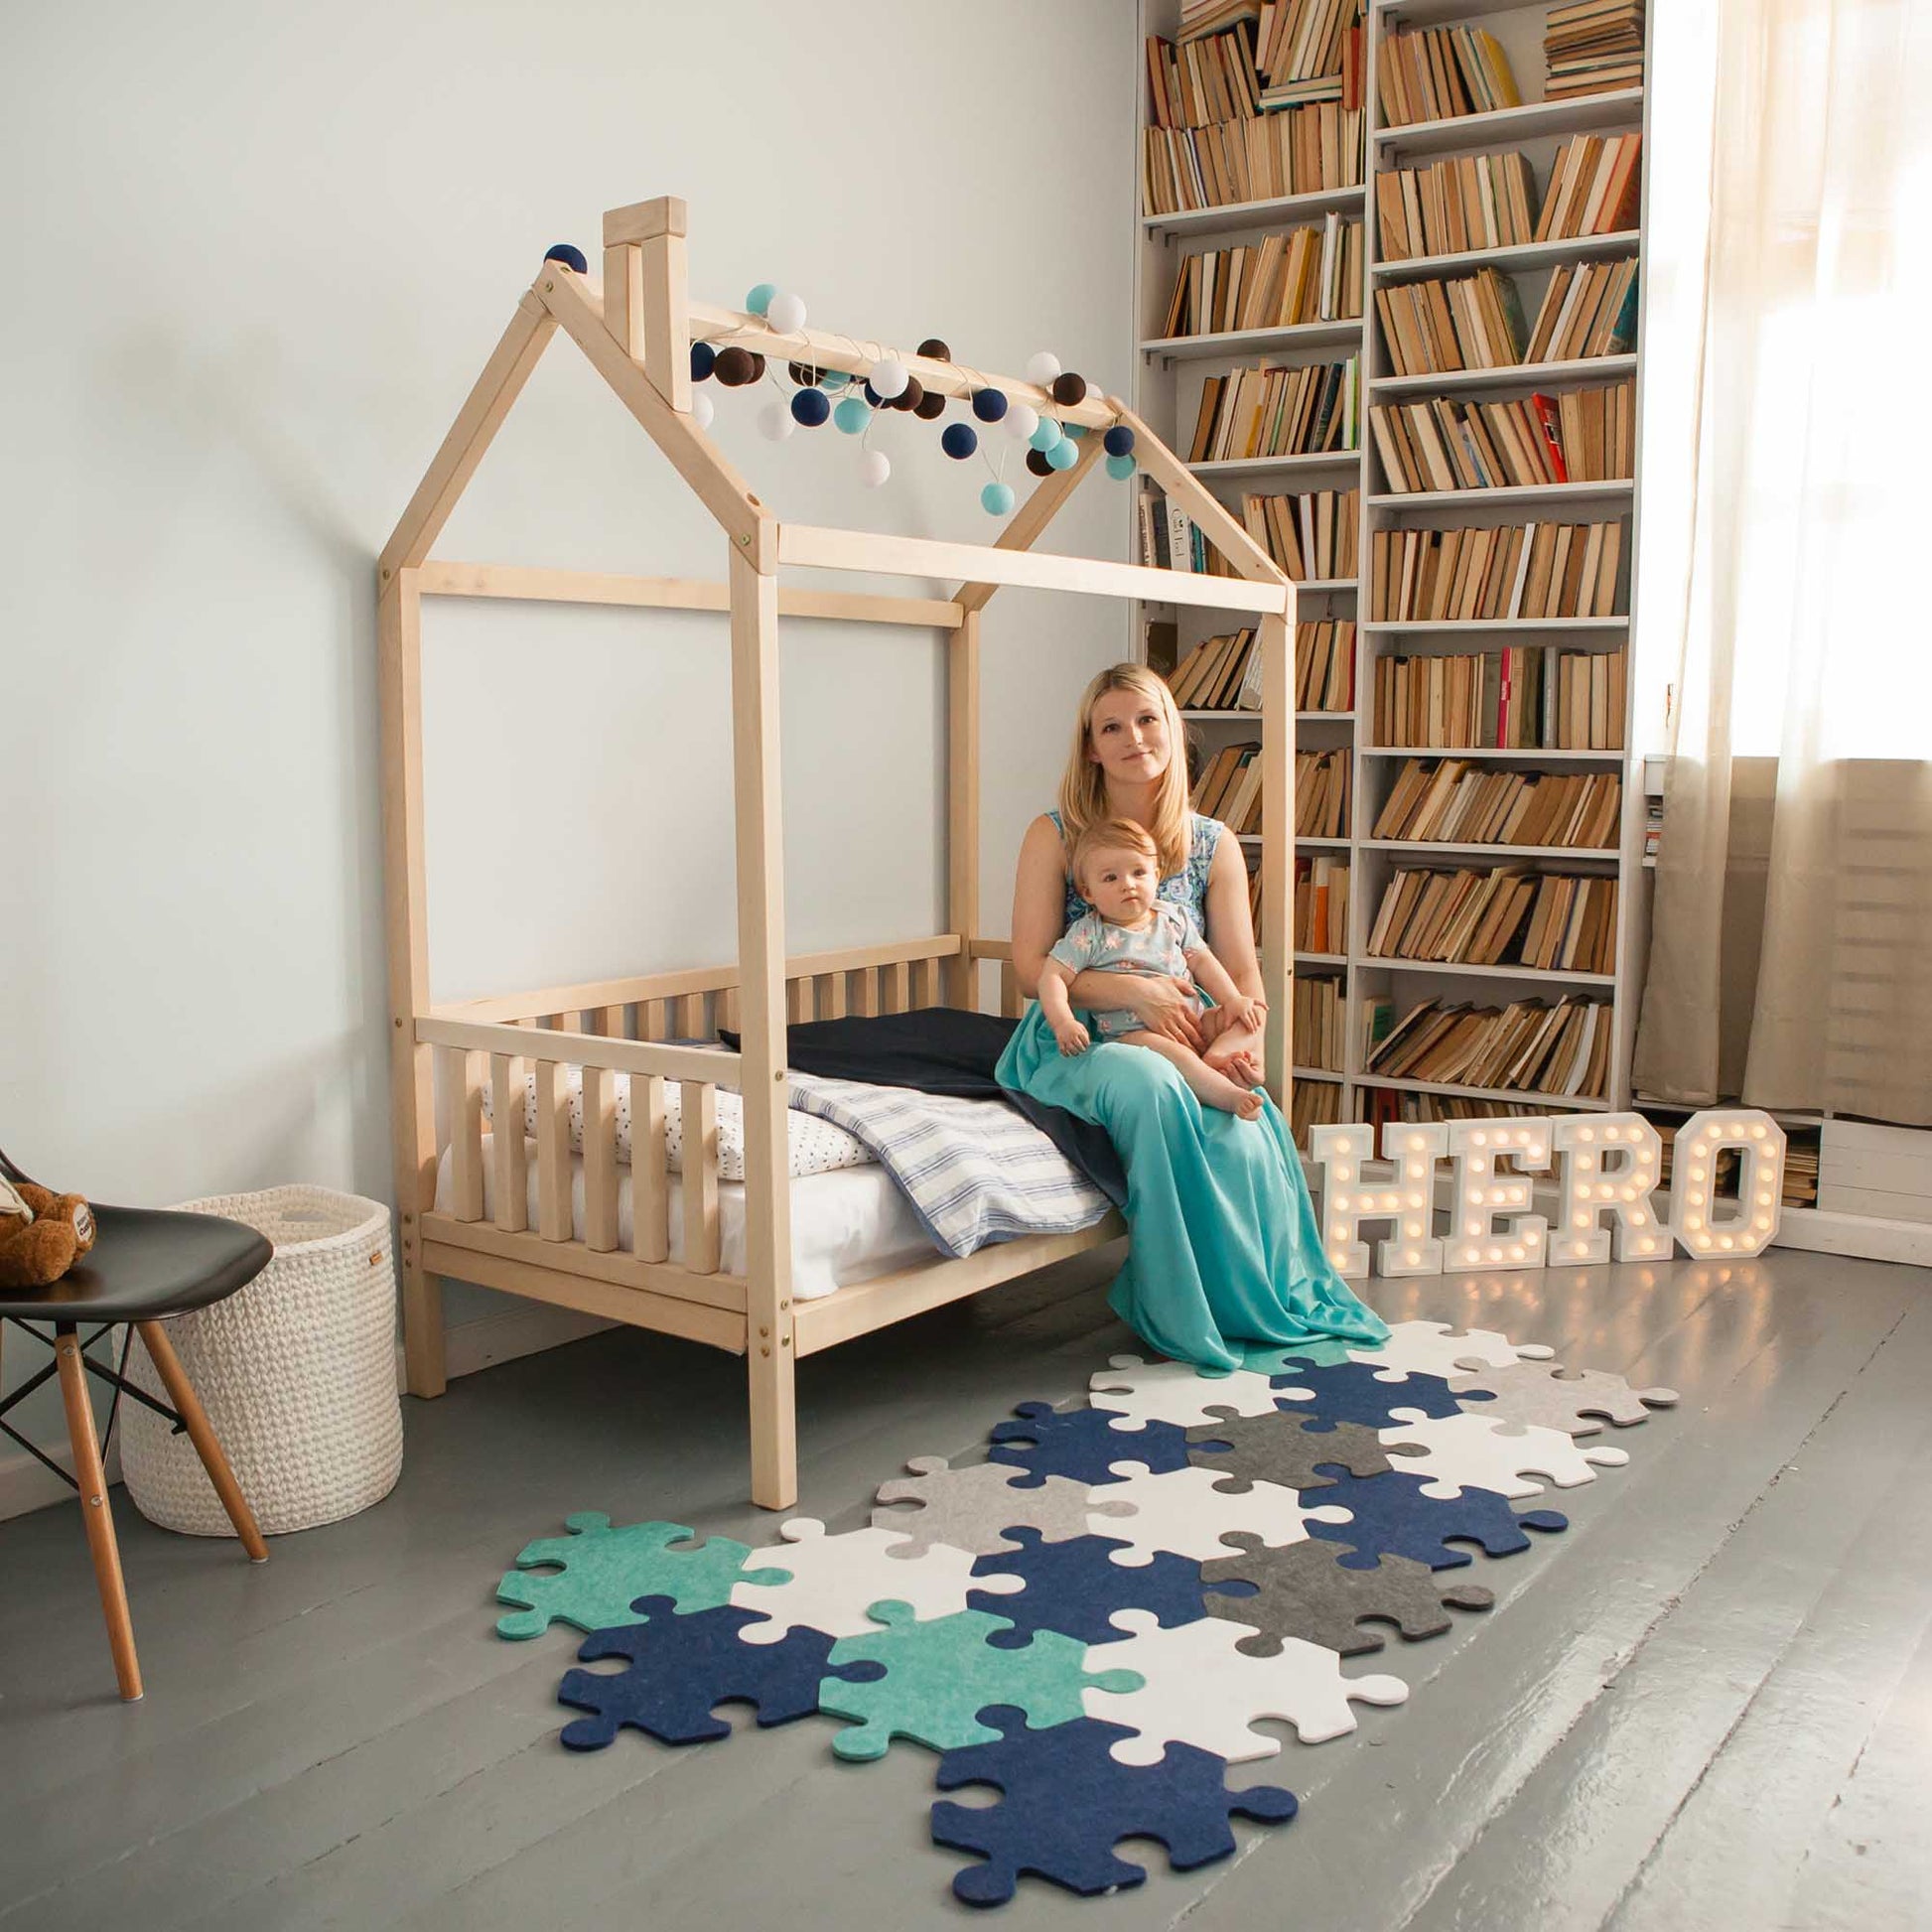 A woman with a baby in a room with a raised house bed on legs with 3-sided rails and bookshelves.